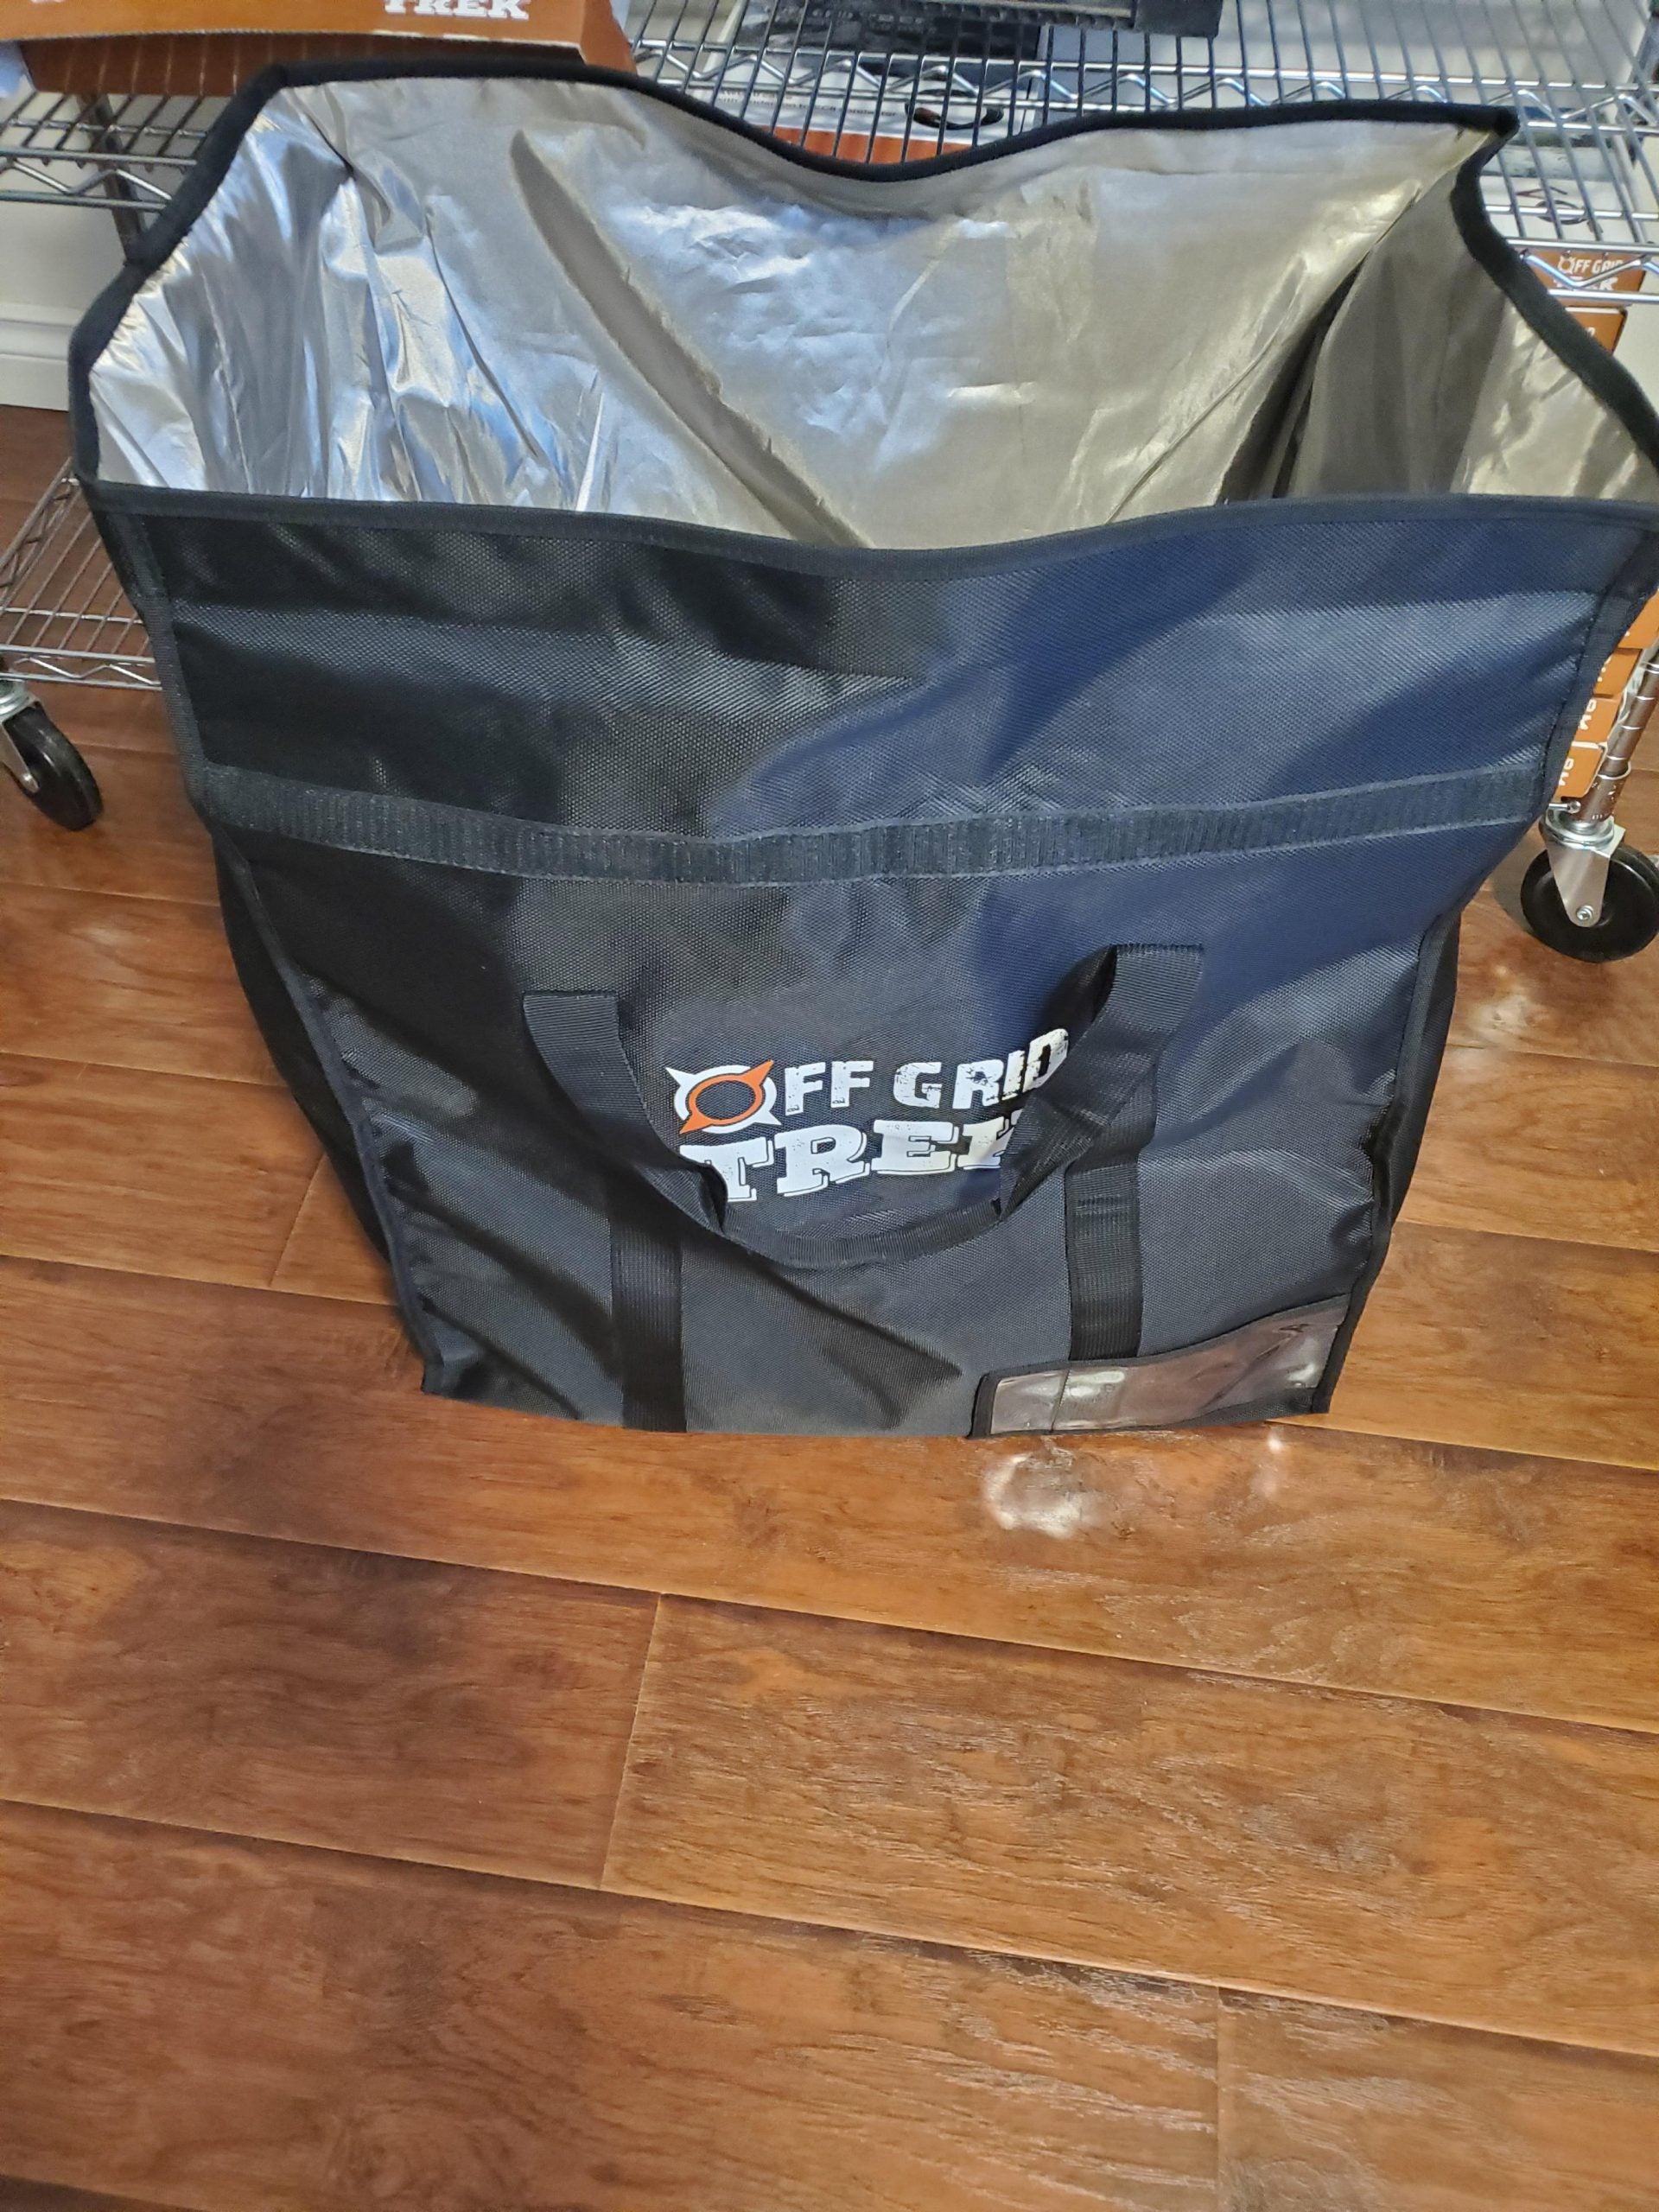 OffGrid Extract Faraday Bag (Patent Pending)